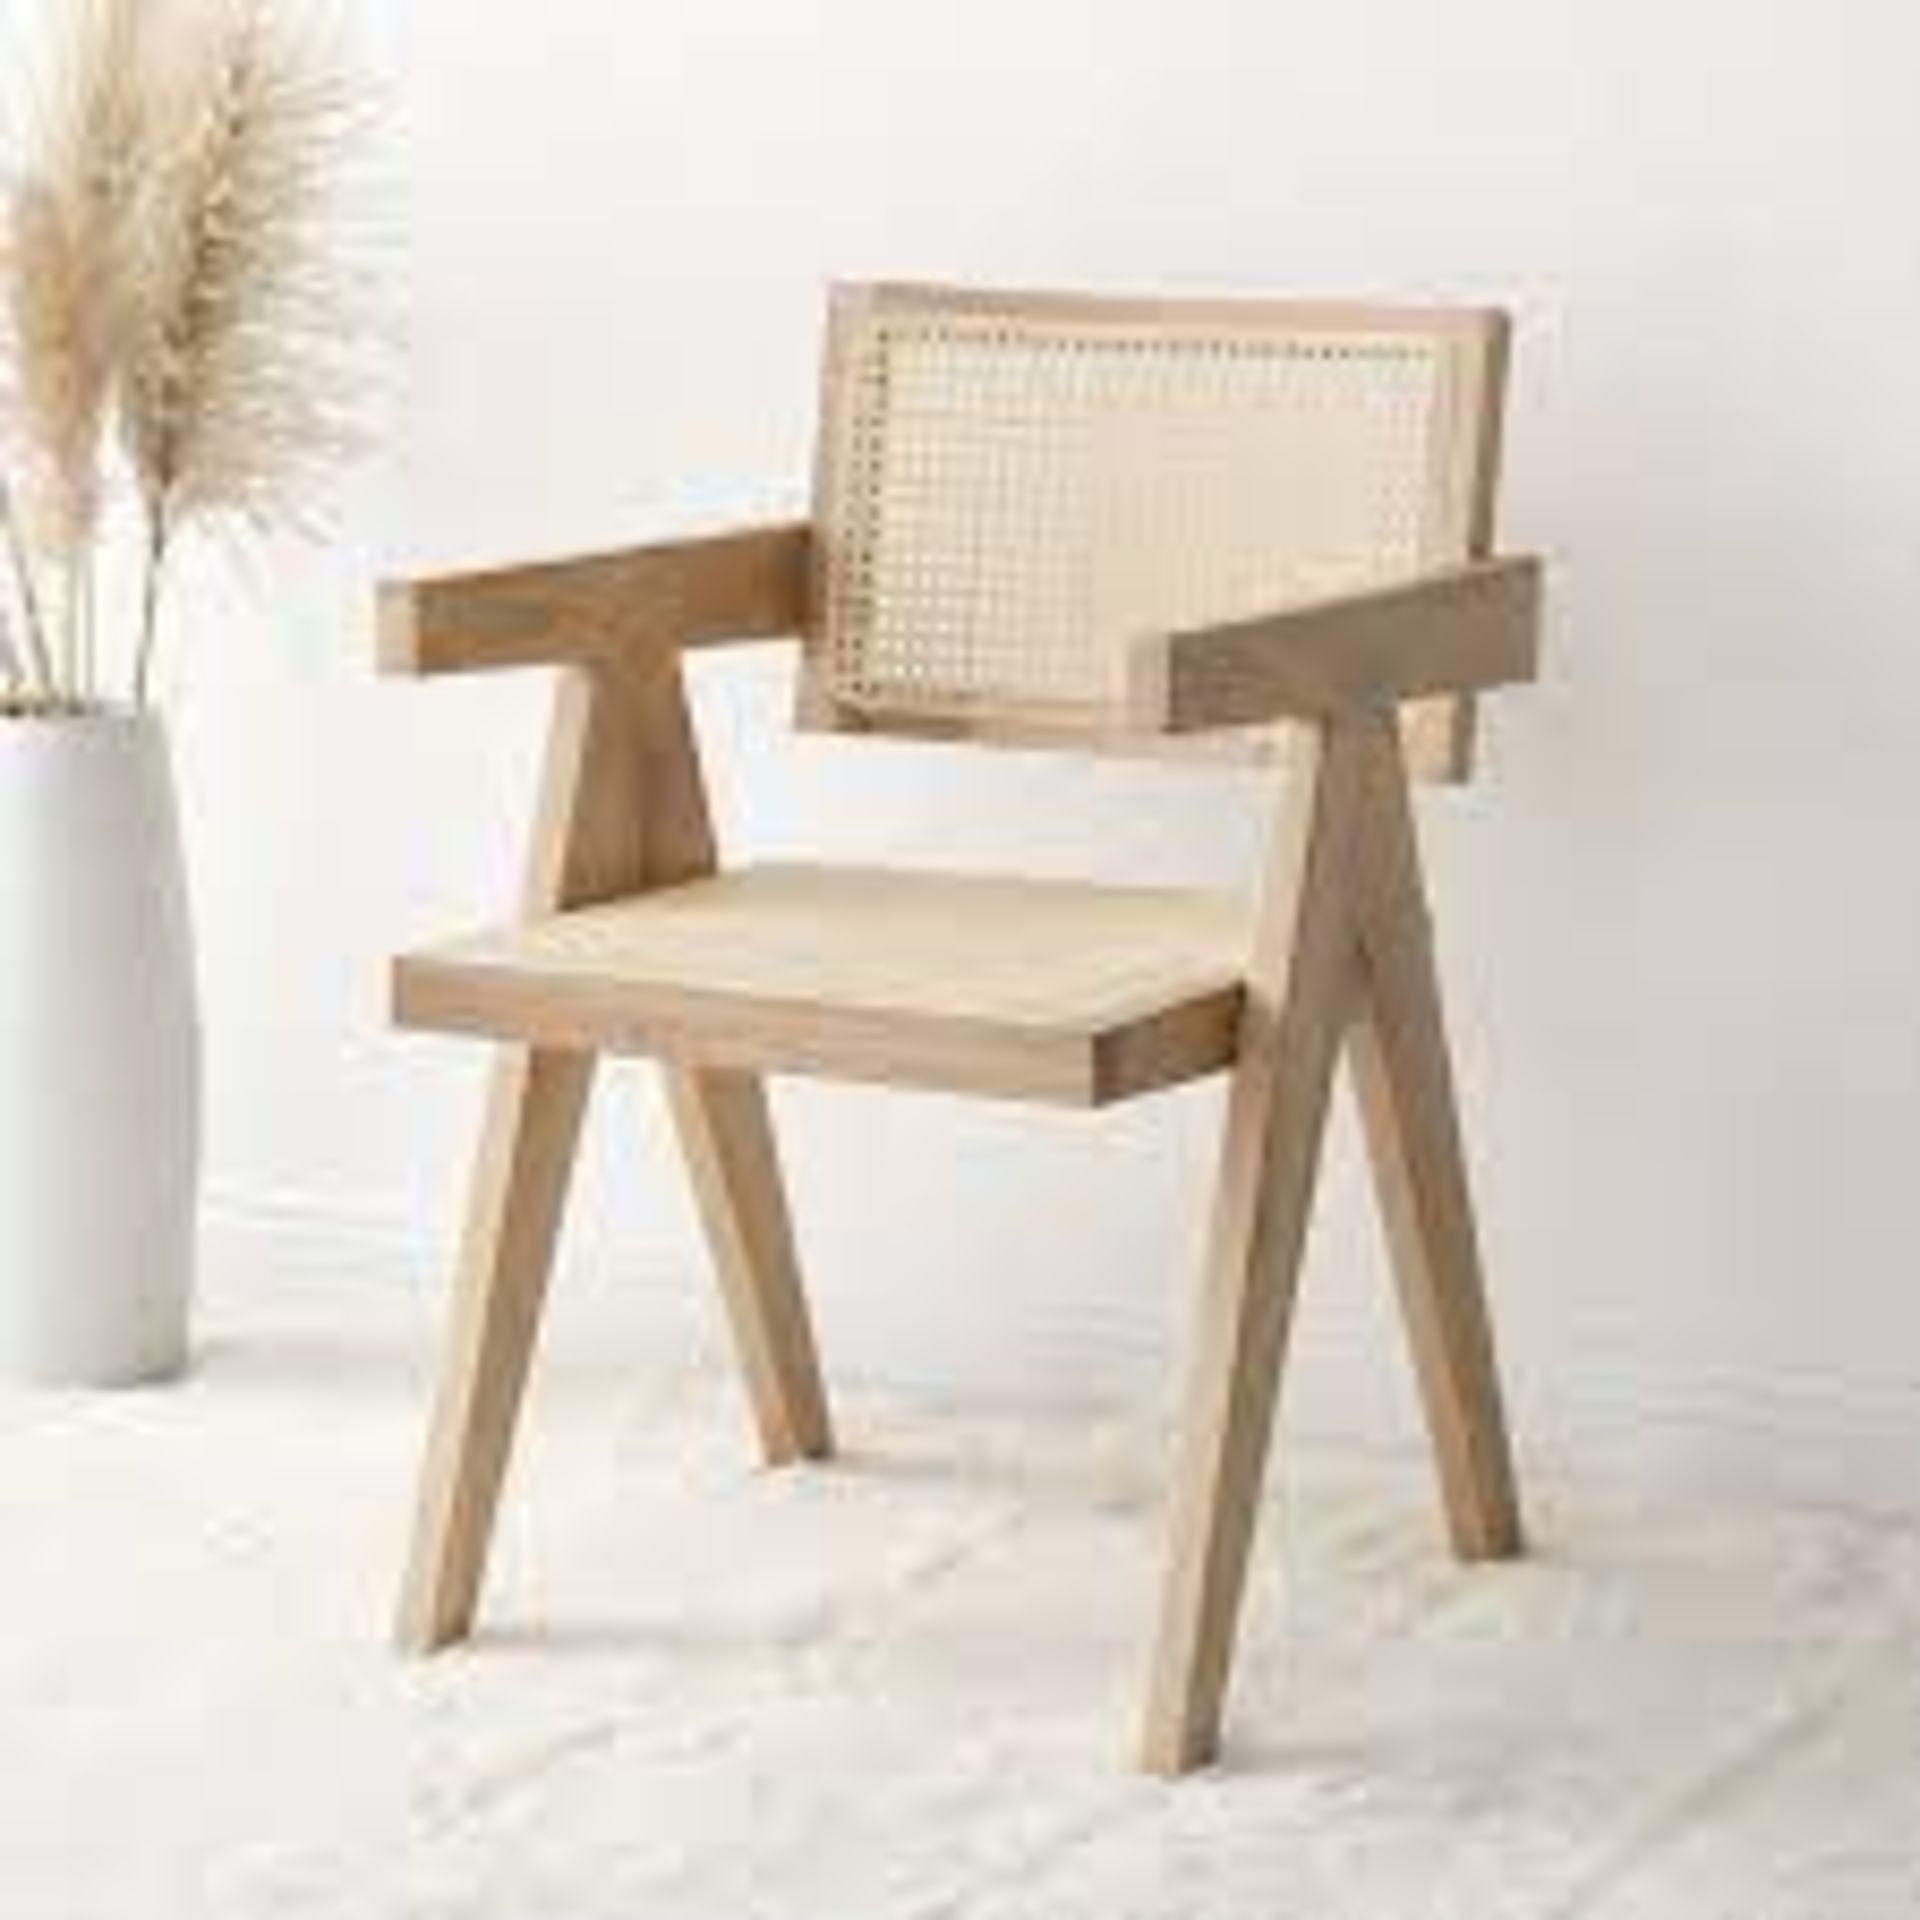 Jeanne Natural Colour Cane Rattan Solid Beech Wood Dining Chair. - SR6. The cane rattan in the chair